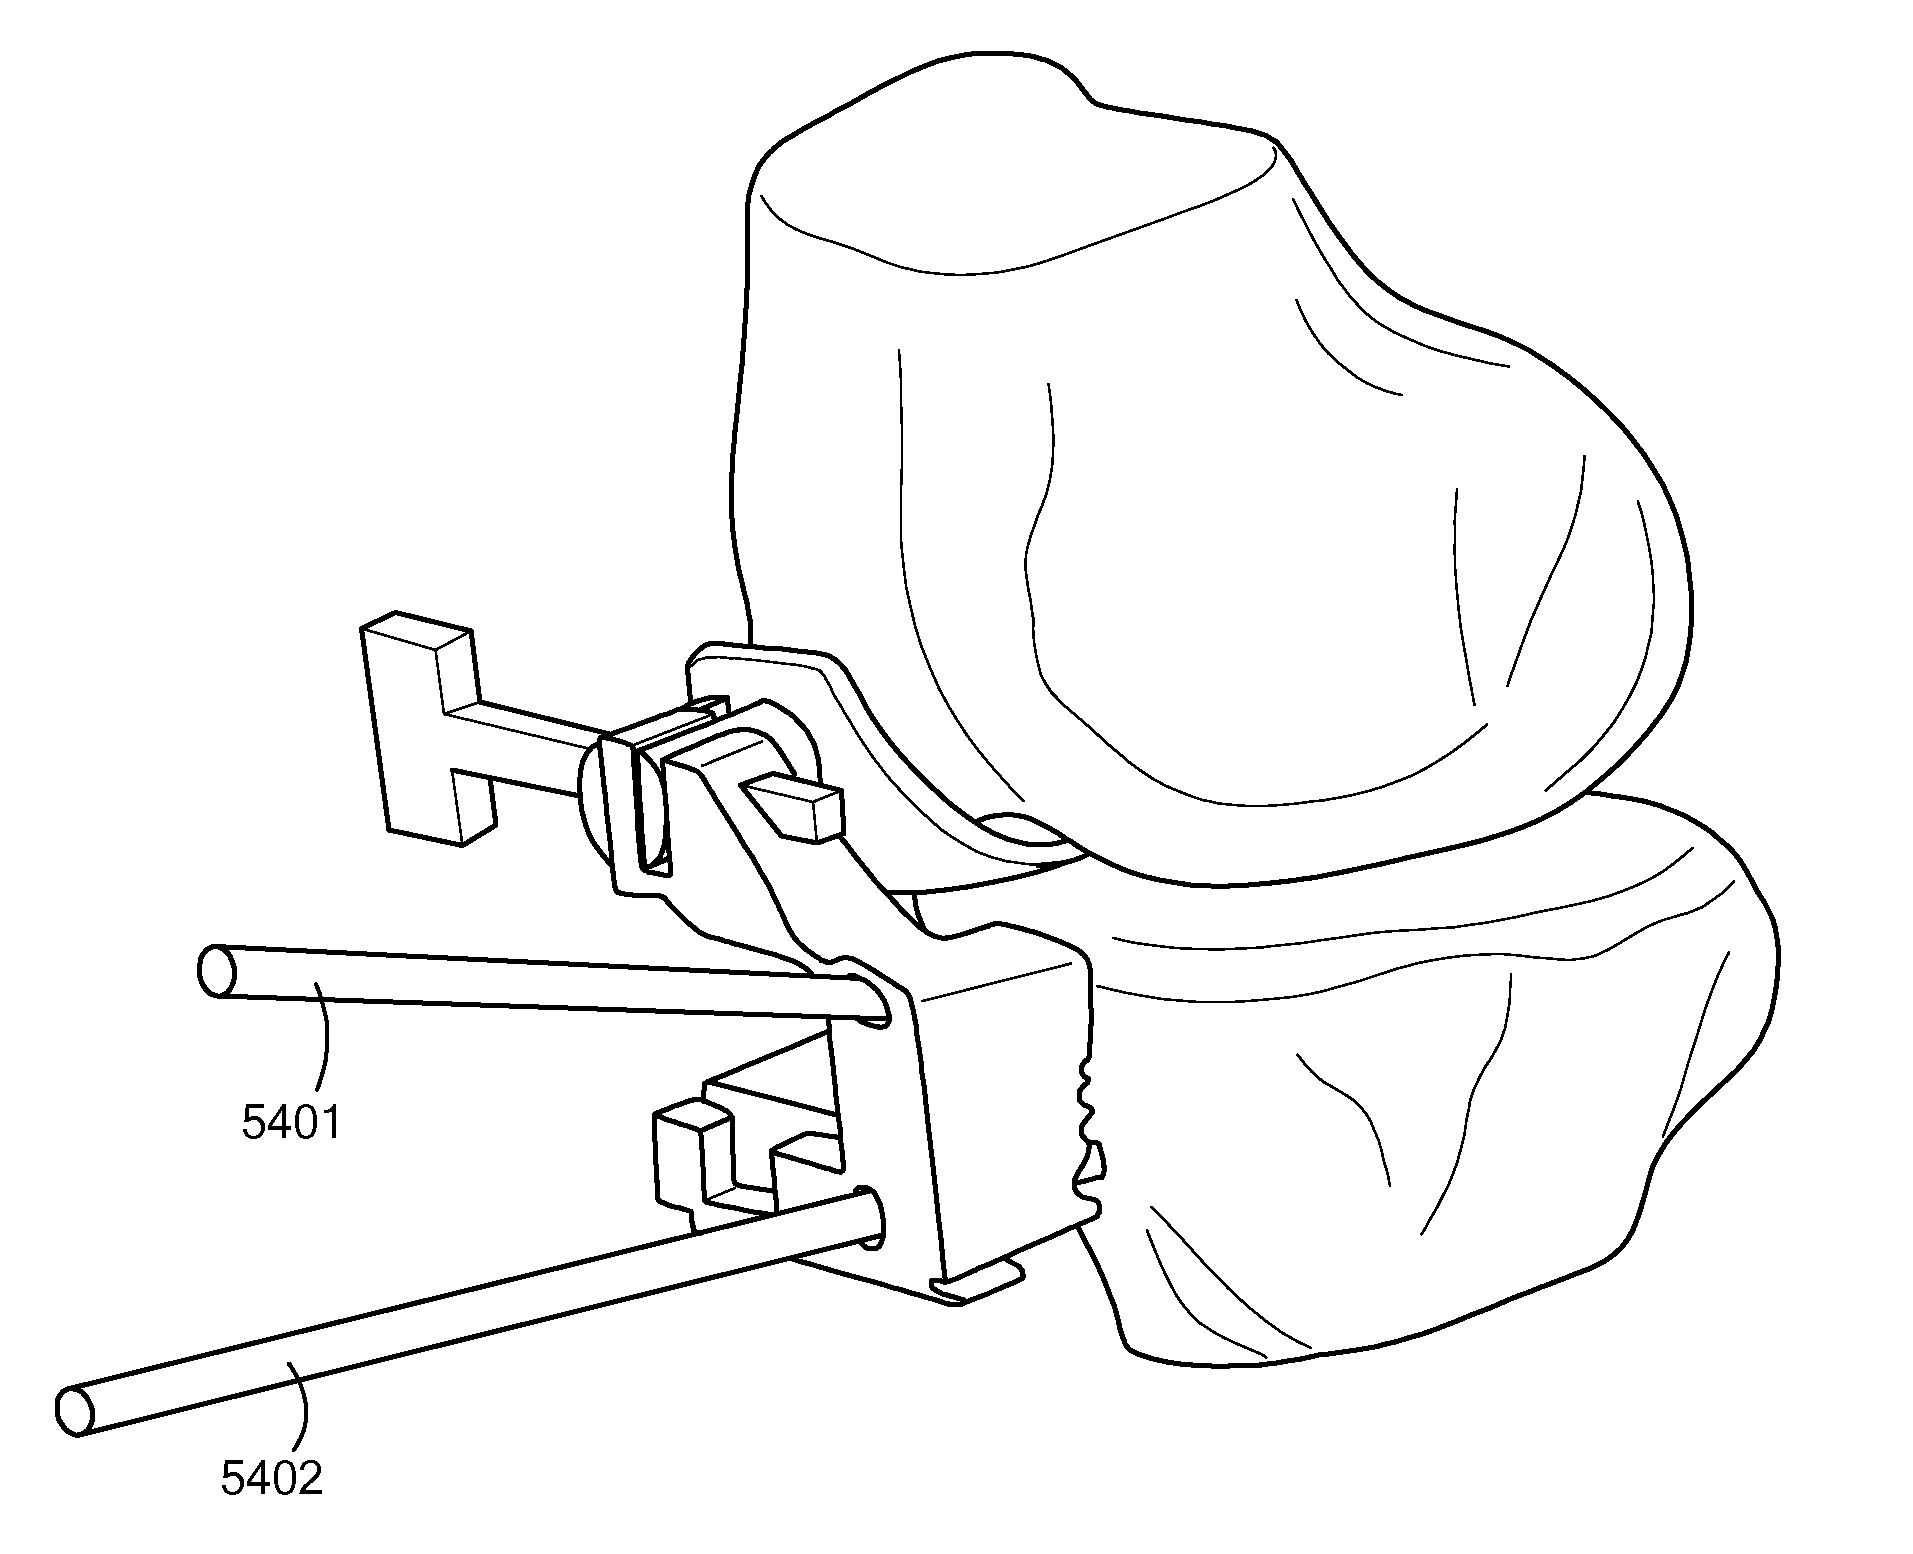 Patient Selectable Joint Arthroplasty Devices and Surgical Tools